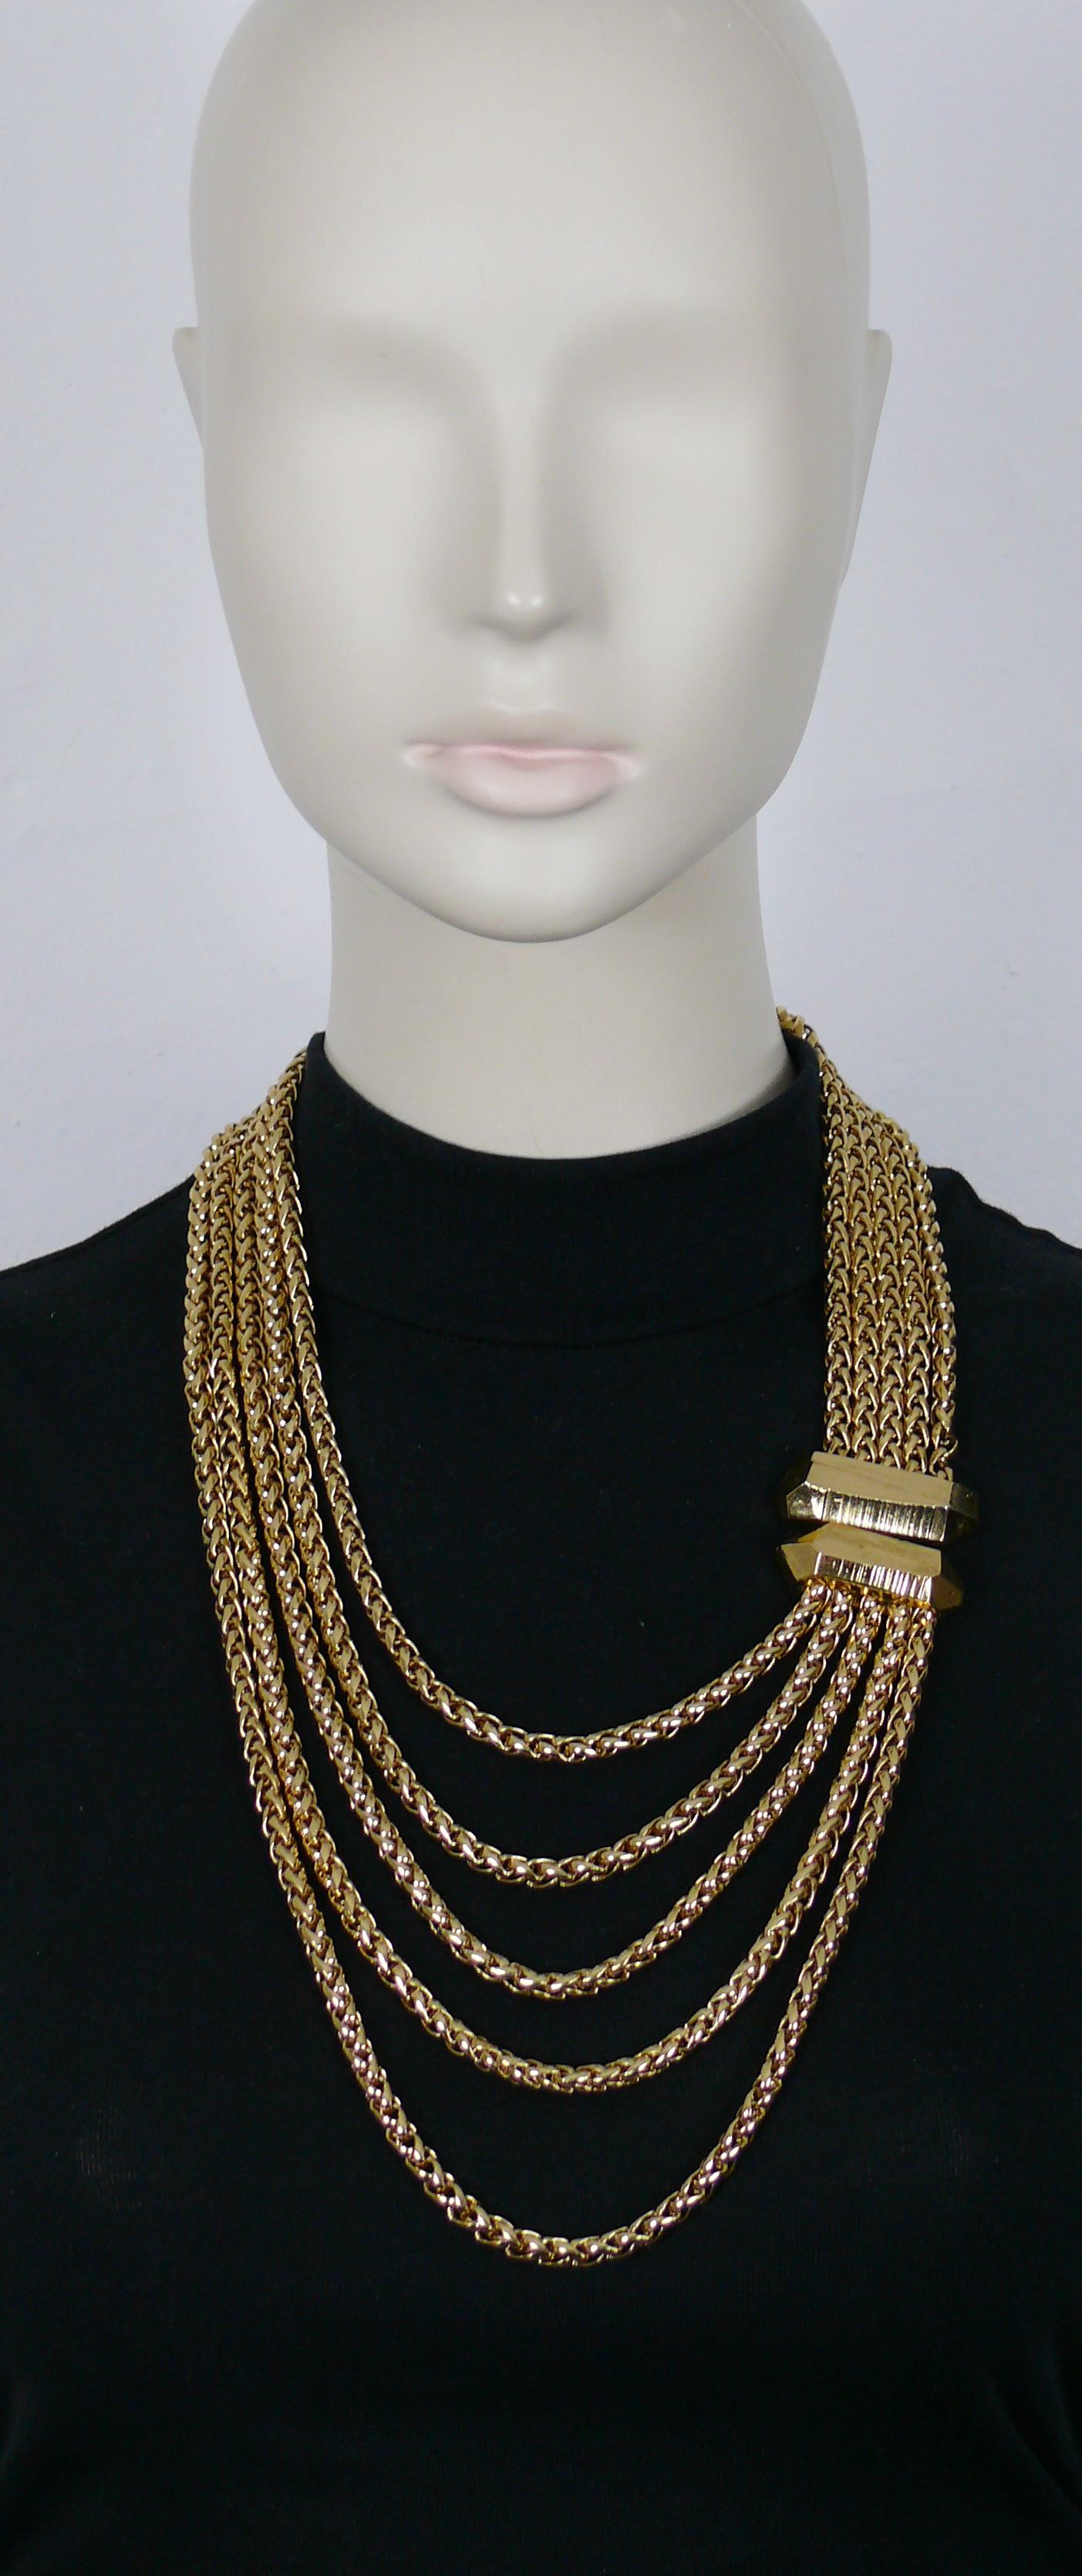 YVES SAINT LAURENT by ROBERT GOOSSENS vintage gold tone multi-strand chain necklace featuring a rock-crystal shape design clasp.

Hook clasp closure.

Embossed YSL Made in France.

Indicative measurements : length approx. 54 cm (21.26